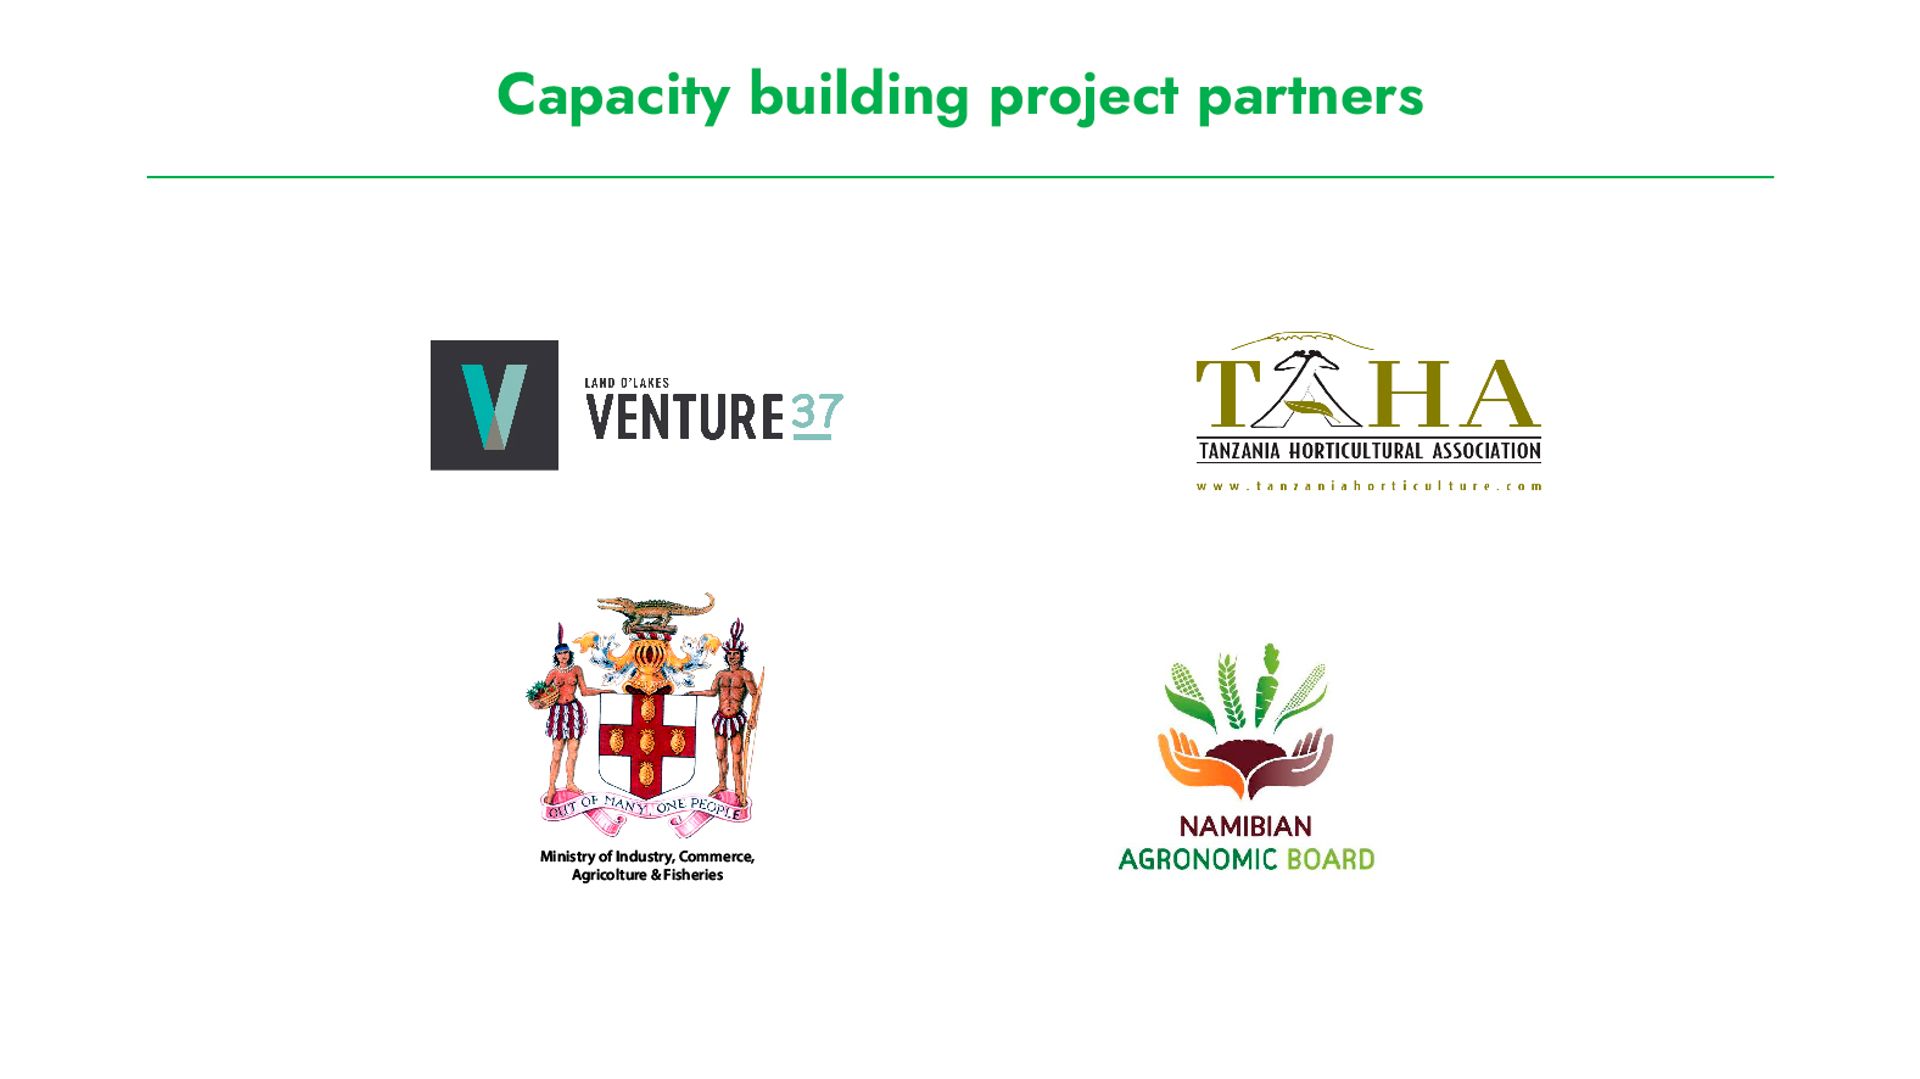 Infographic showing selected GLOBALG.A.P. capacity building project partners